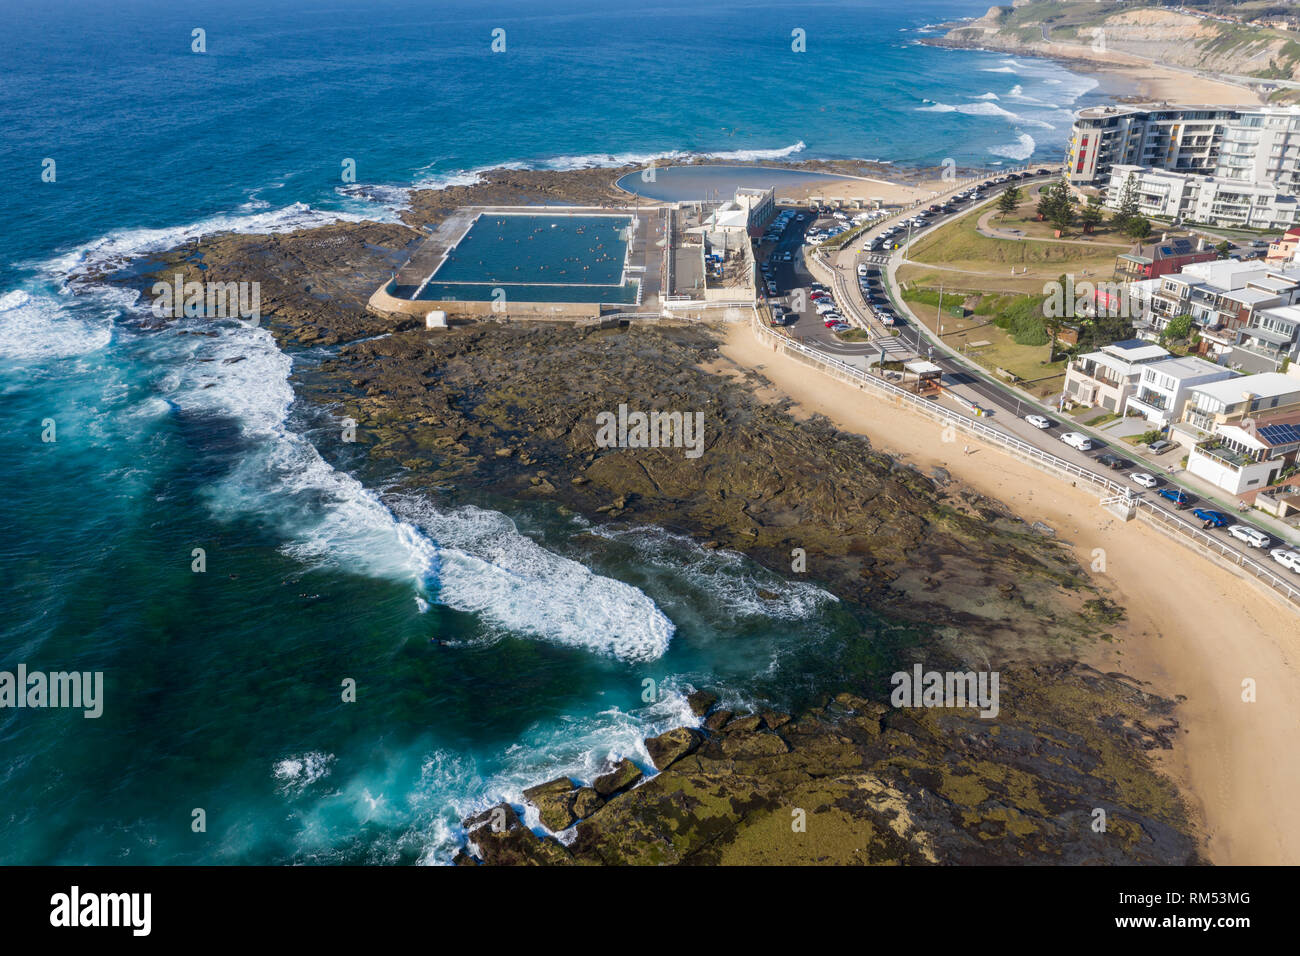 Aerial view of Newcastle Baths and the Cowrie Hole. Newcastle is a popular destination in NSW and is the second oldest city in Australia and located o Stock Photo